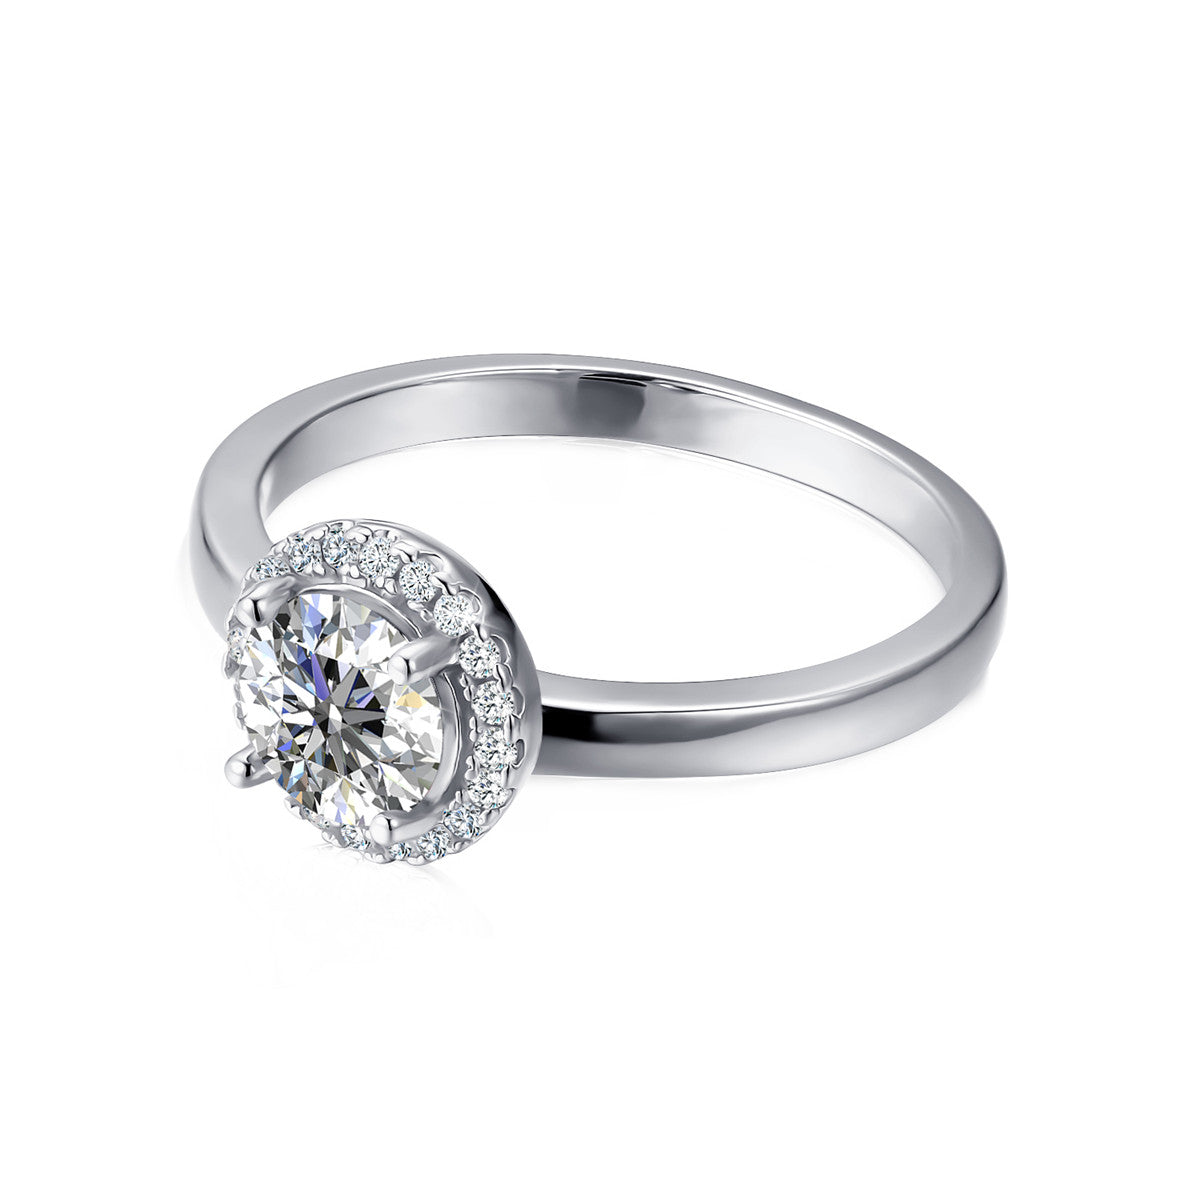 Moissanite by Cate & Chloe Cora Sterling Silver Ring with Moissanite Crystals